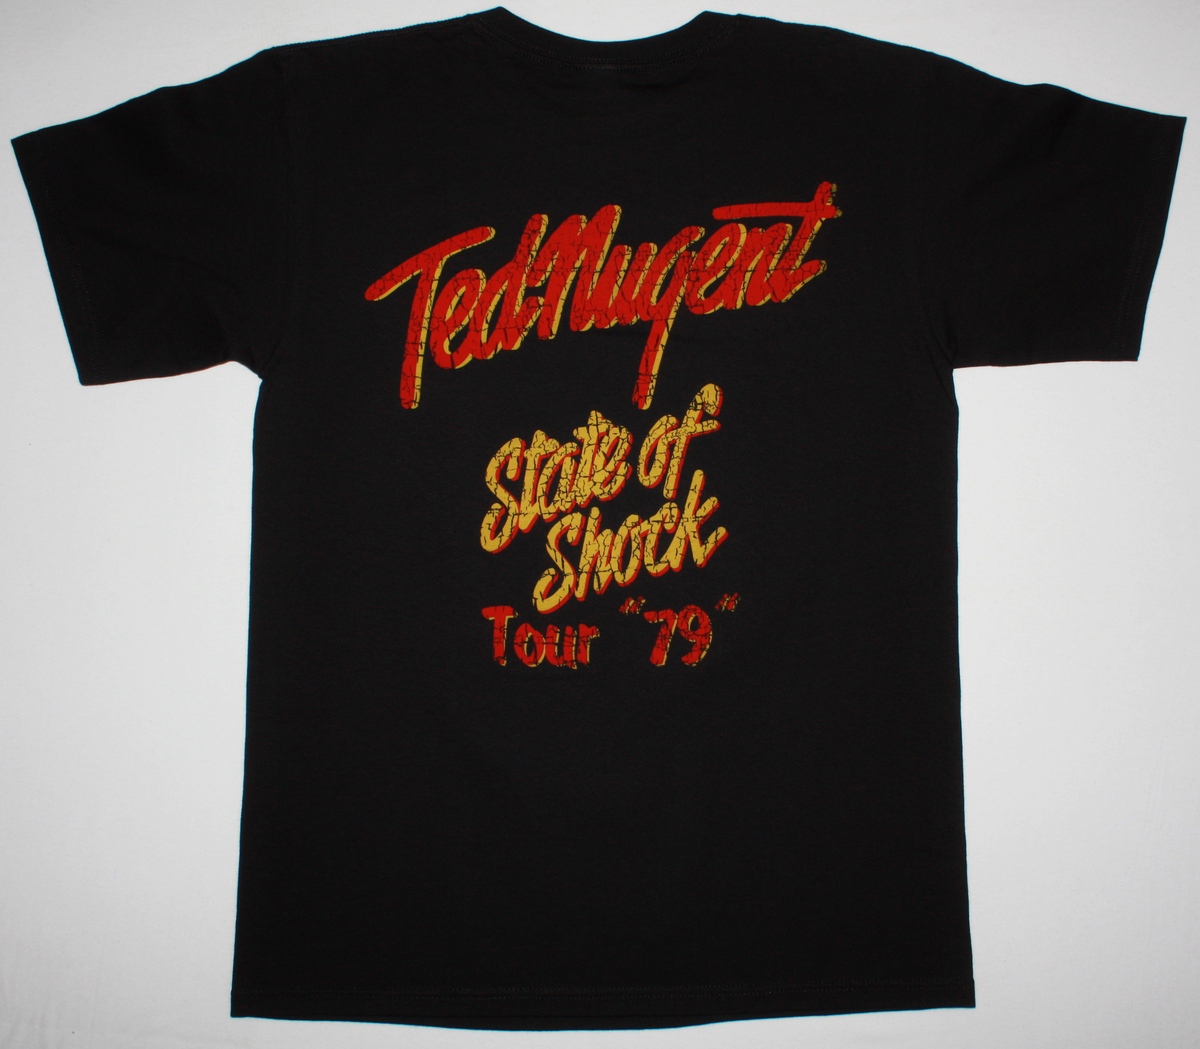 TED NUGENT STATE OF SHOCK 79 NEW BLACK T-SHIRT